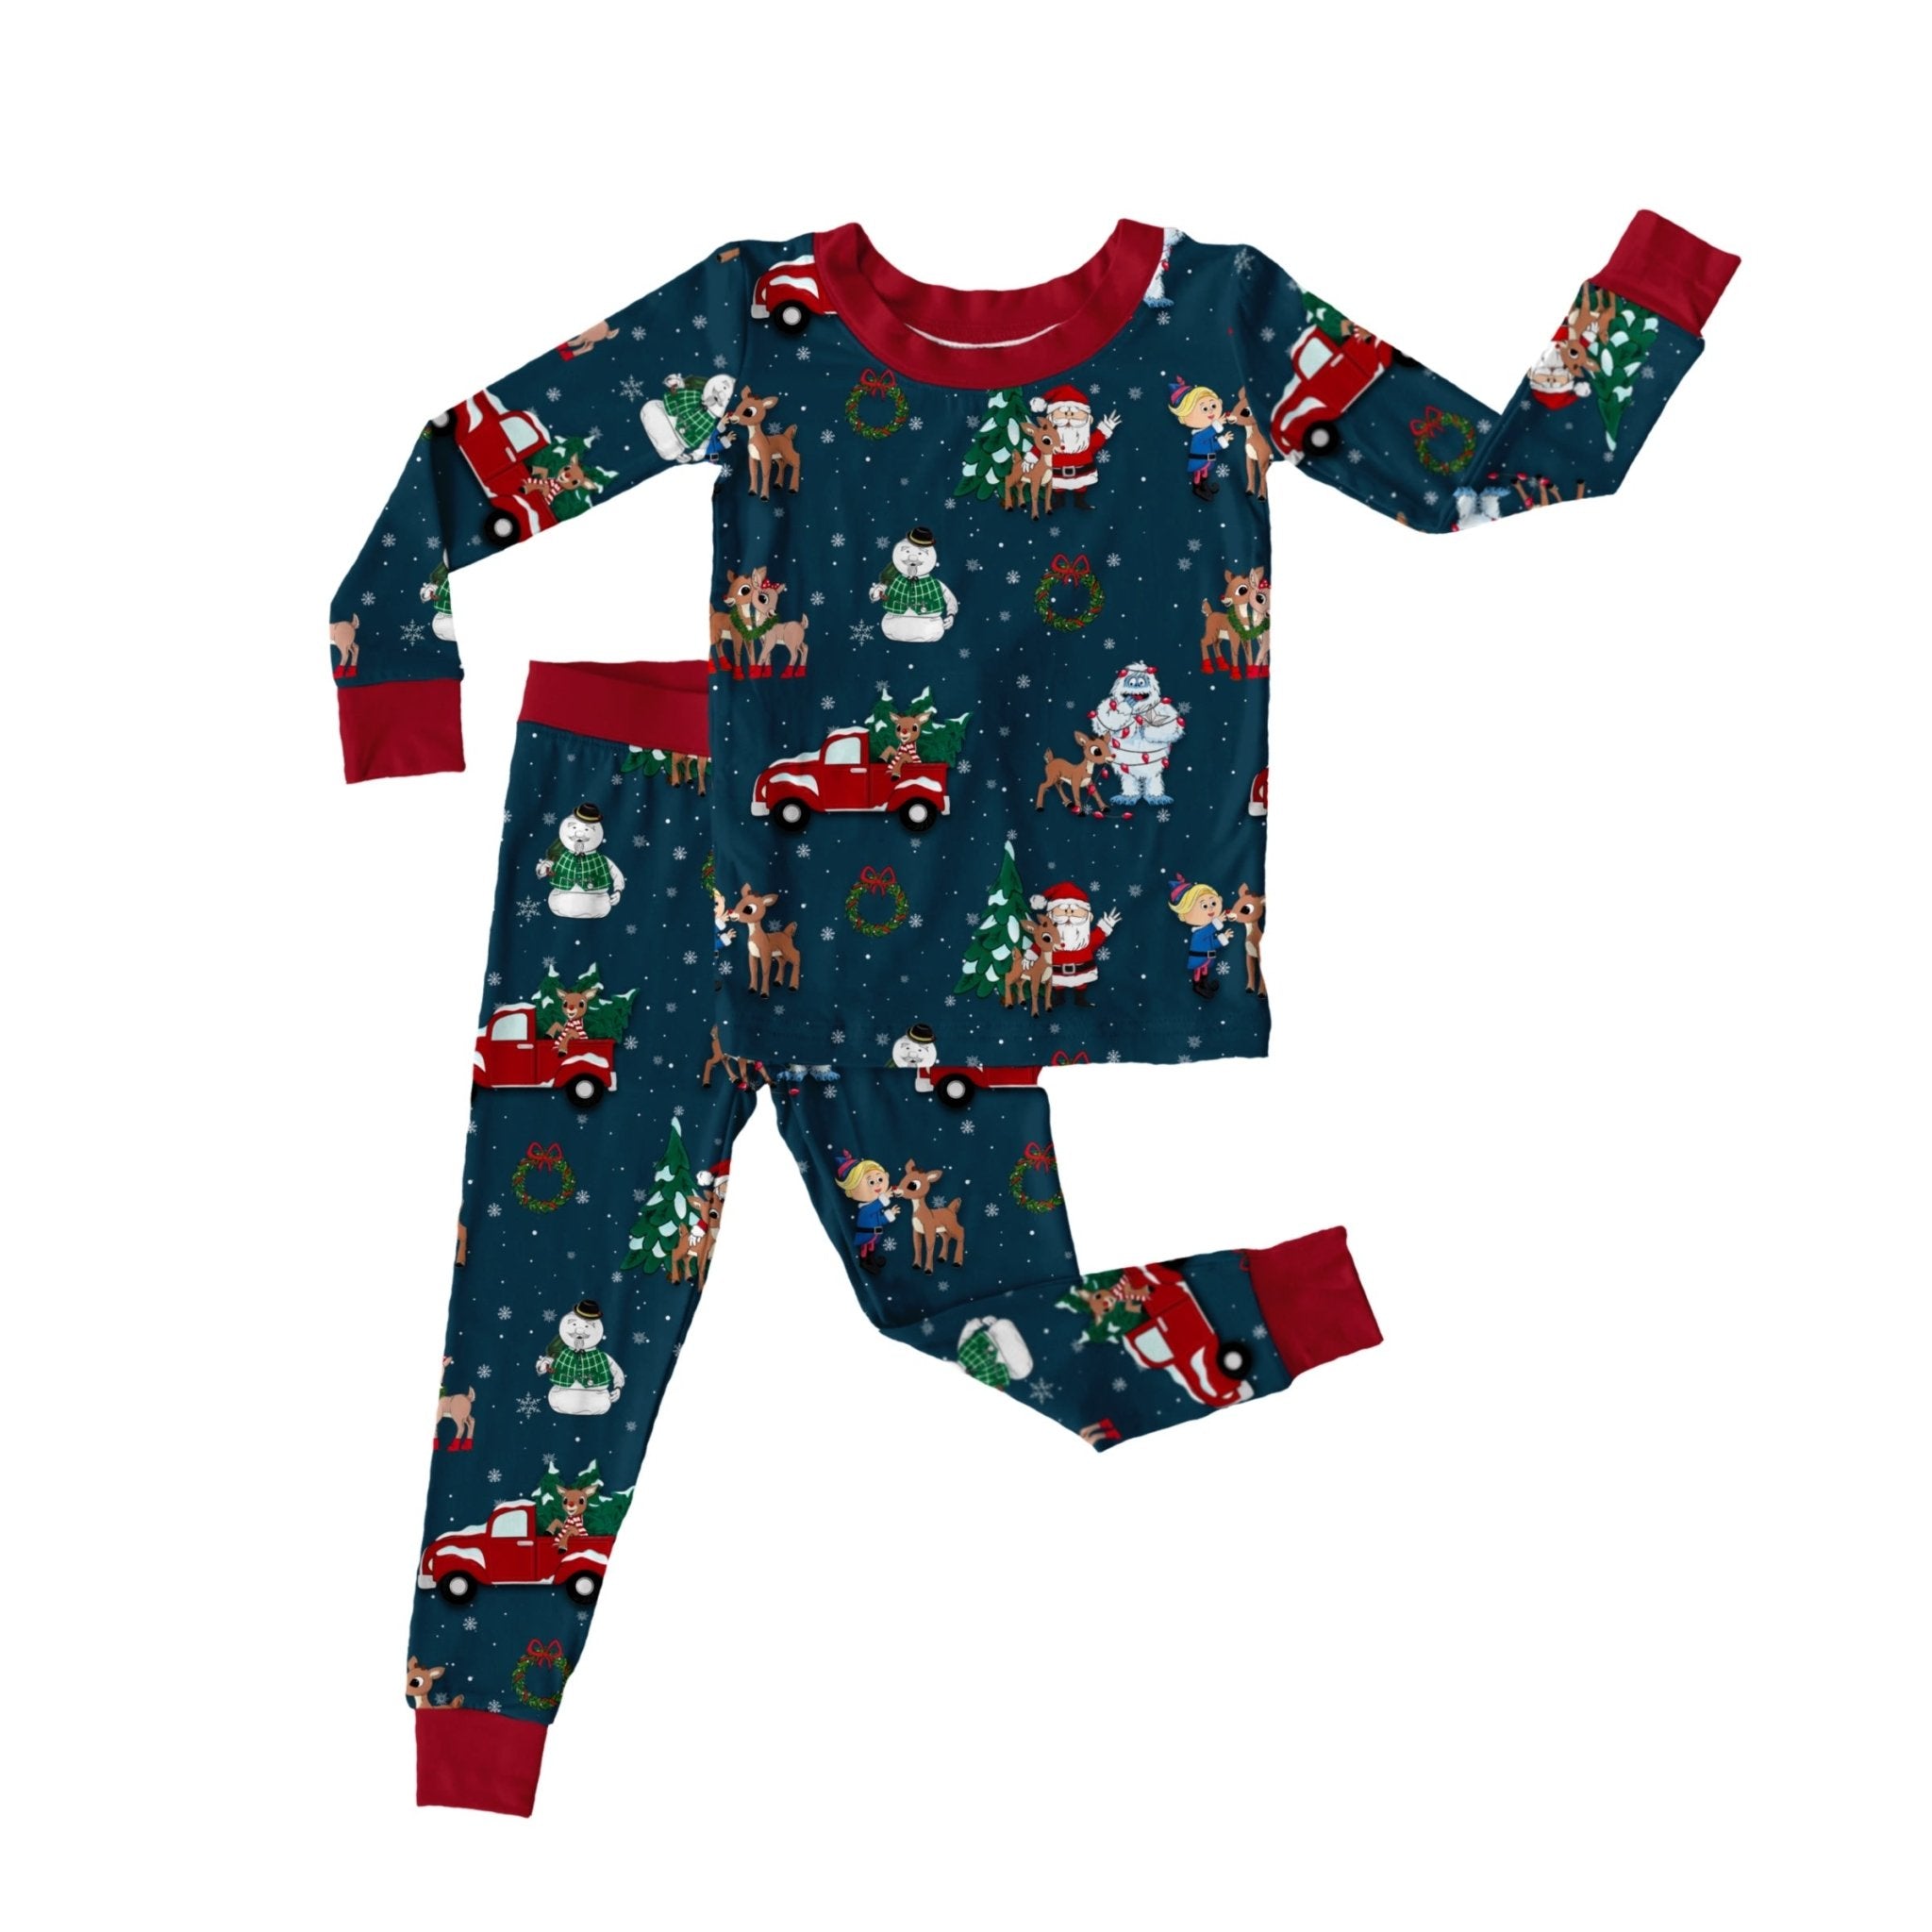 TWO PIECE JAMMIES - RUDOLPH© & FRIENDS - The Sleepy Sloth